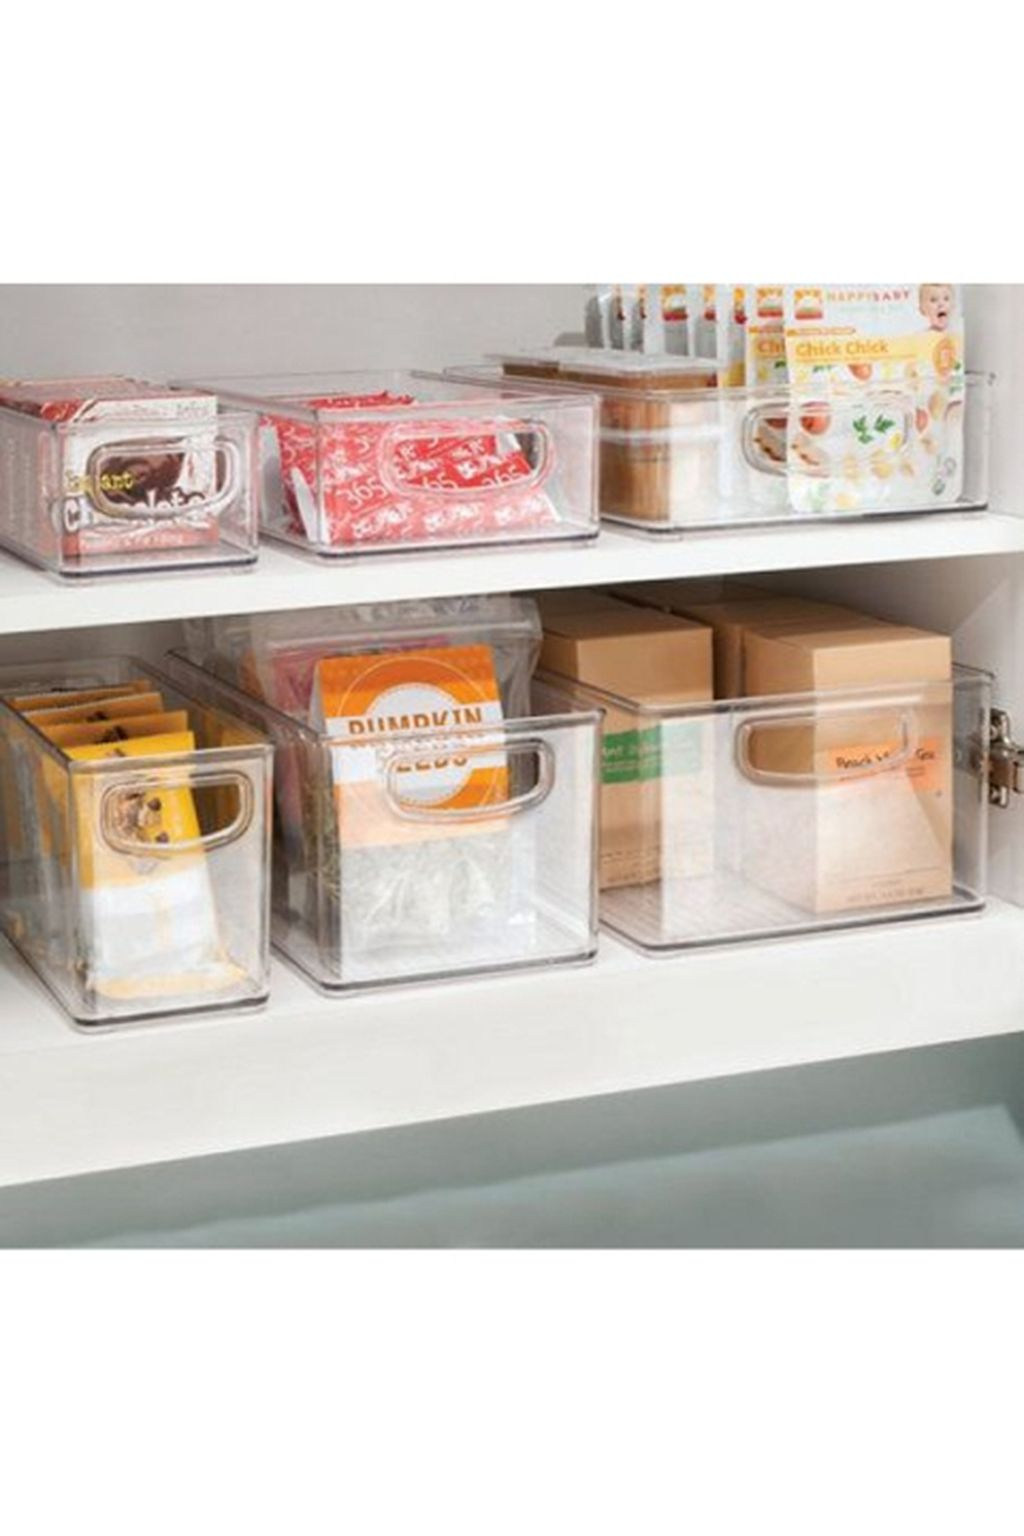 Perfect Diy Storage Container Design Ideas To Try This Month 27